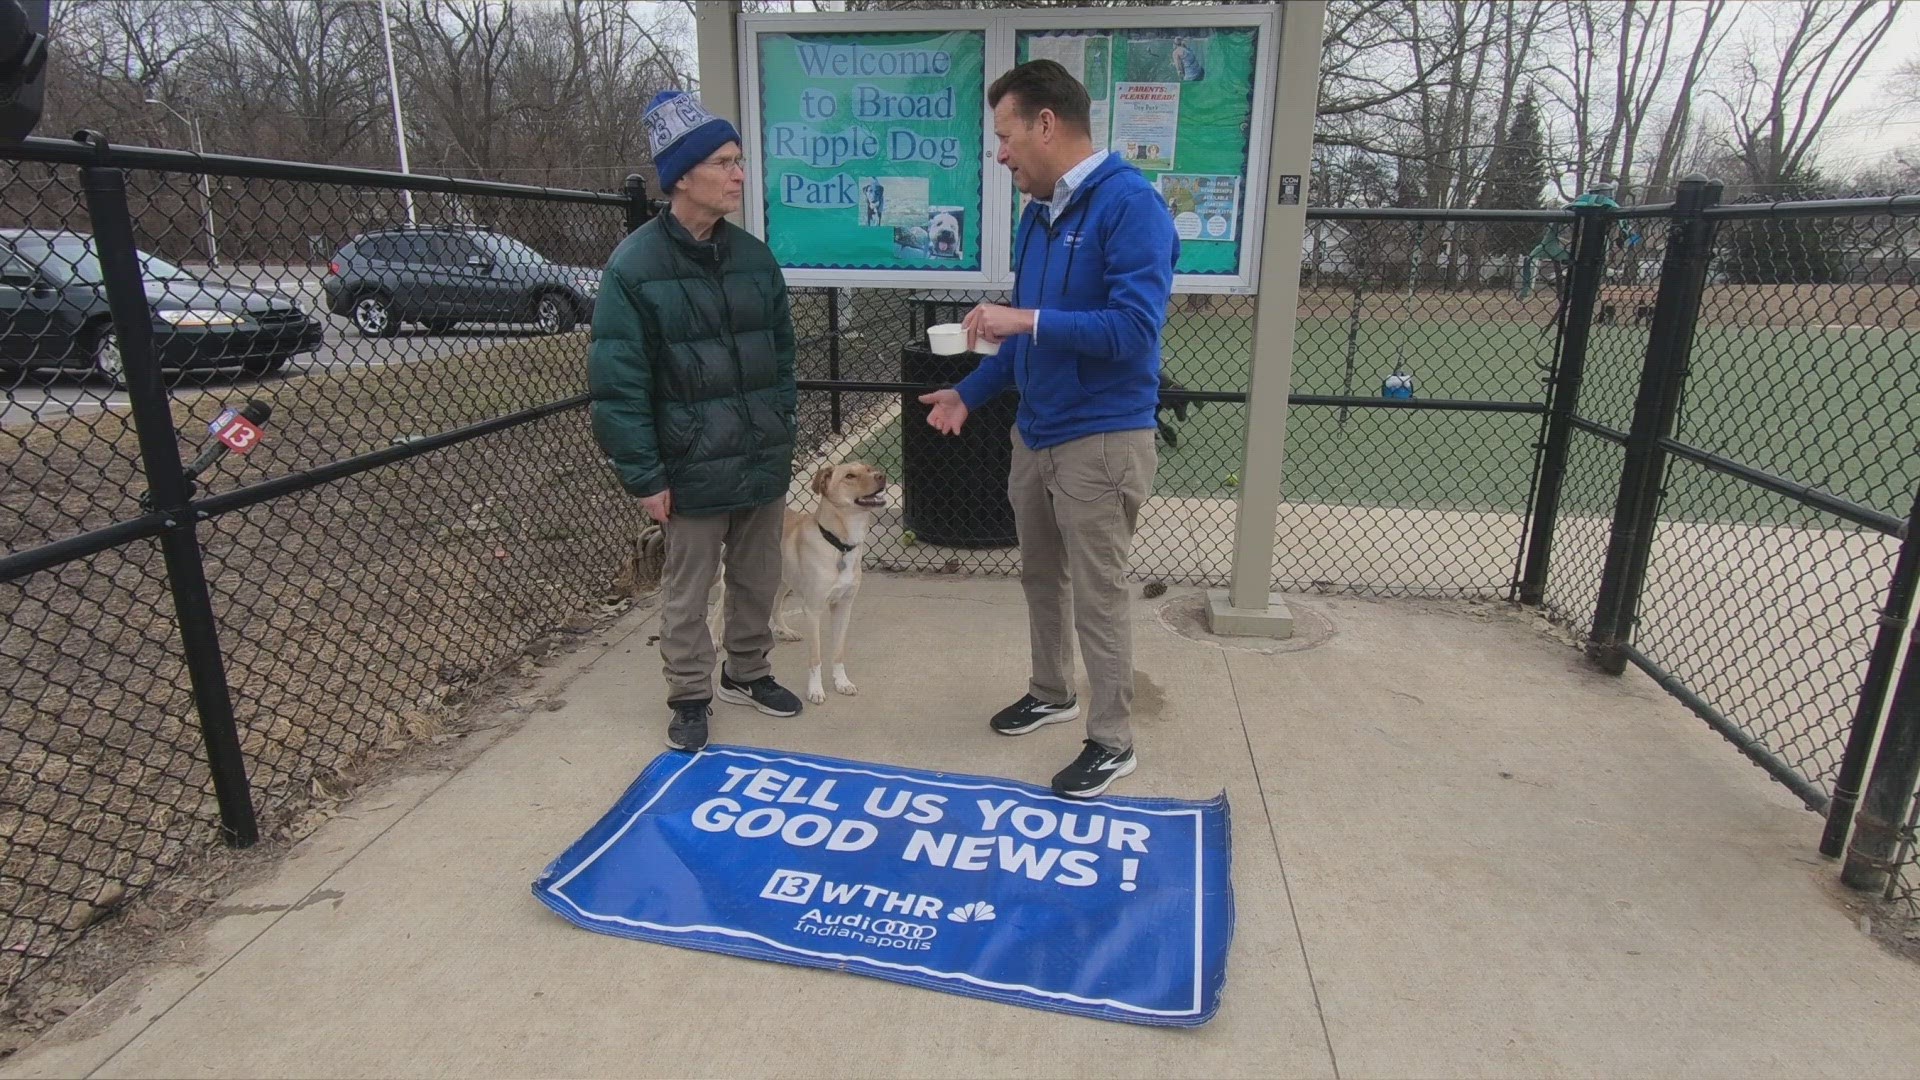 13Sports director Dave Calabro visits the Broad Ripple Bark Park to see if any dogs can pick the winner of the Super Bowl. He also is looking for Good News!